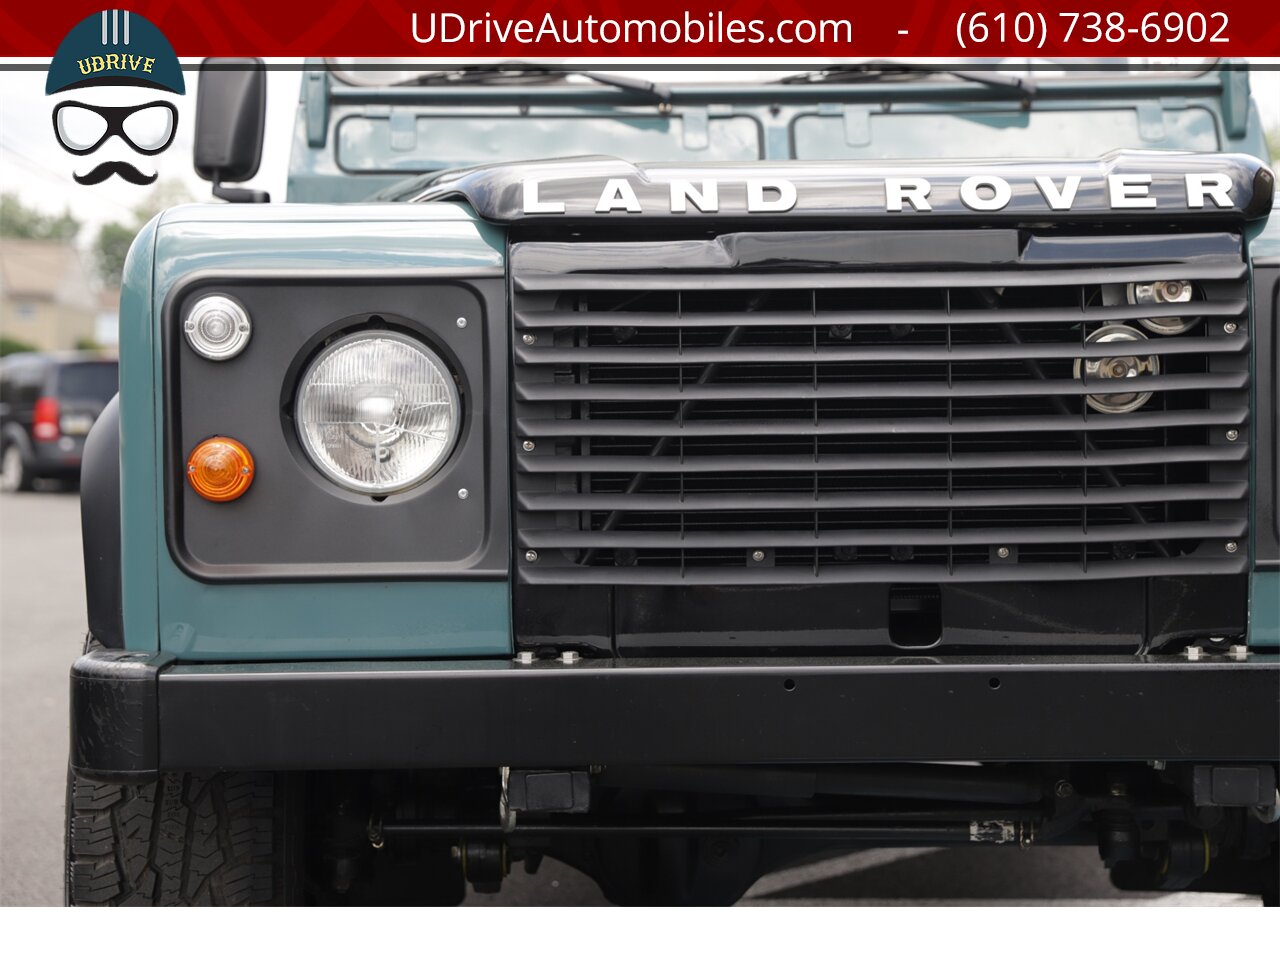 1986 Land Rover Defender 90 D90 4.0L V8 5 Speed Manual New Interior  $25k Recent Engine Build - Photo 14 - West Chester, PA 19382